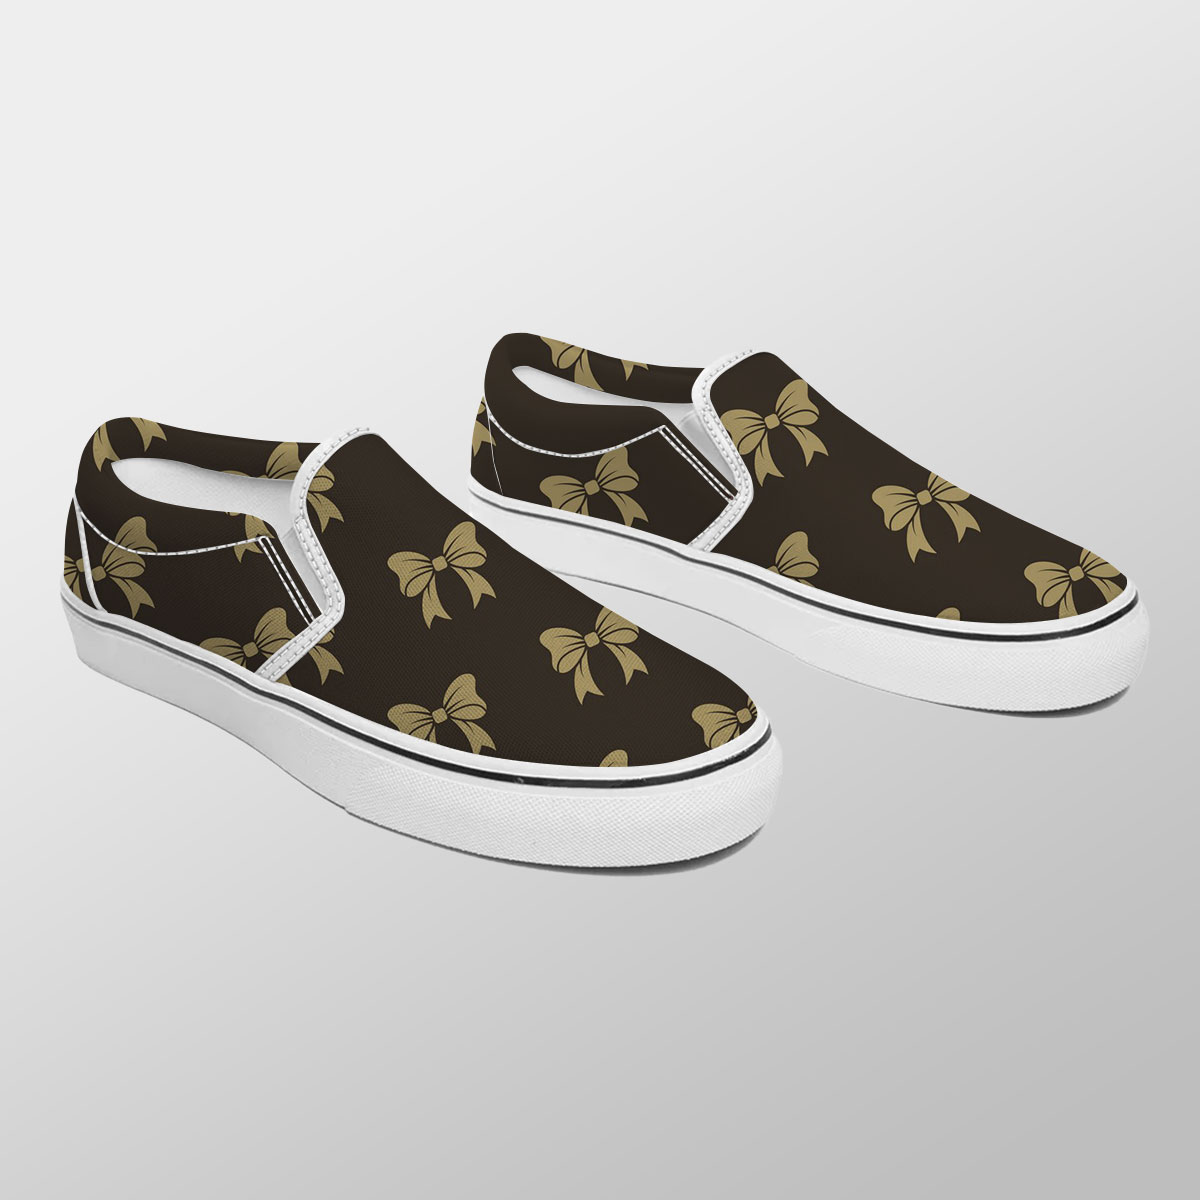 Christmas Bow, Christmas Tree Bows On The Dark Background Slip On Sneakers